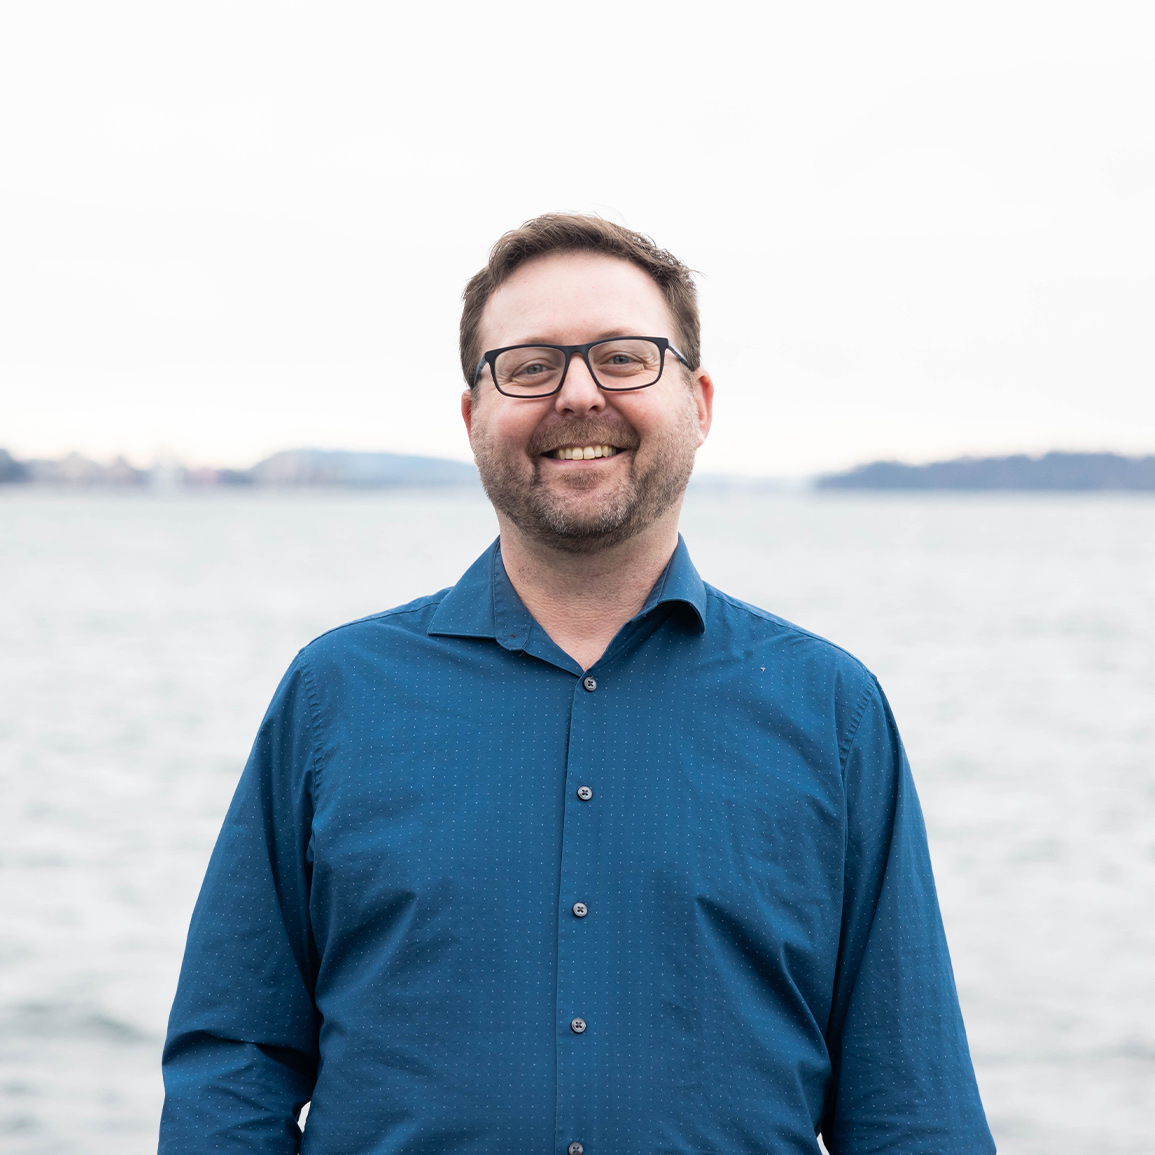 Adam Warner standing in front of the ocean smiling, wearing a blue button down shirt.